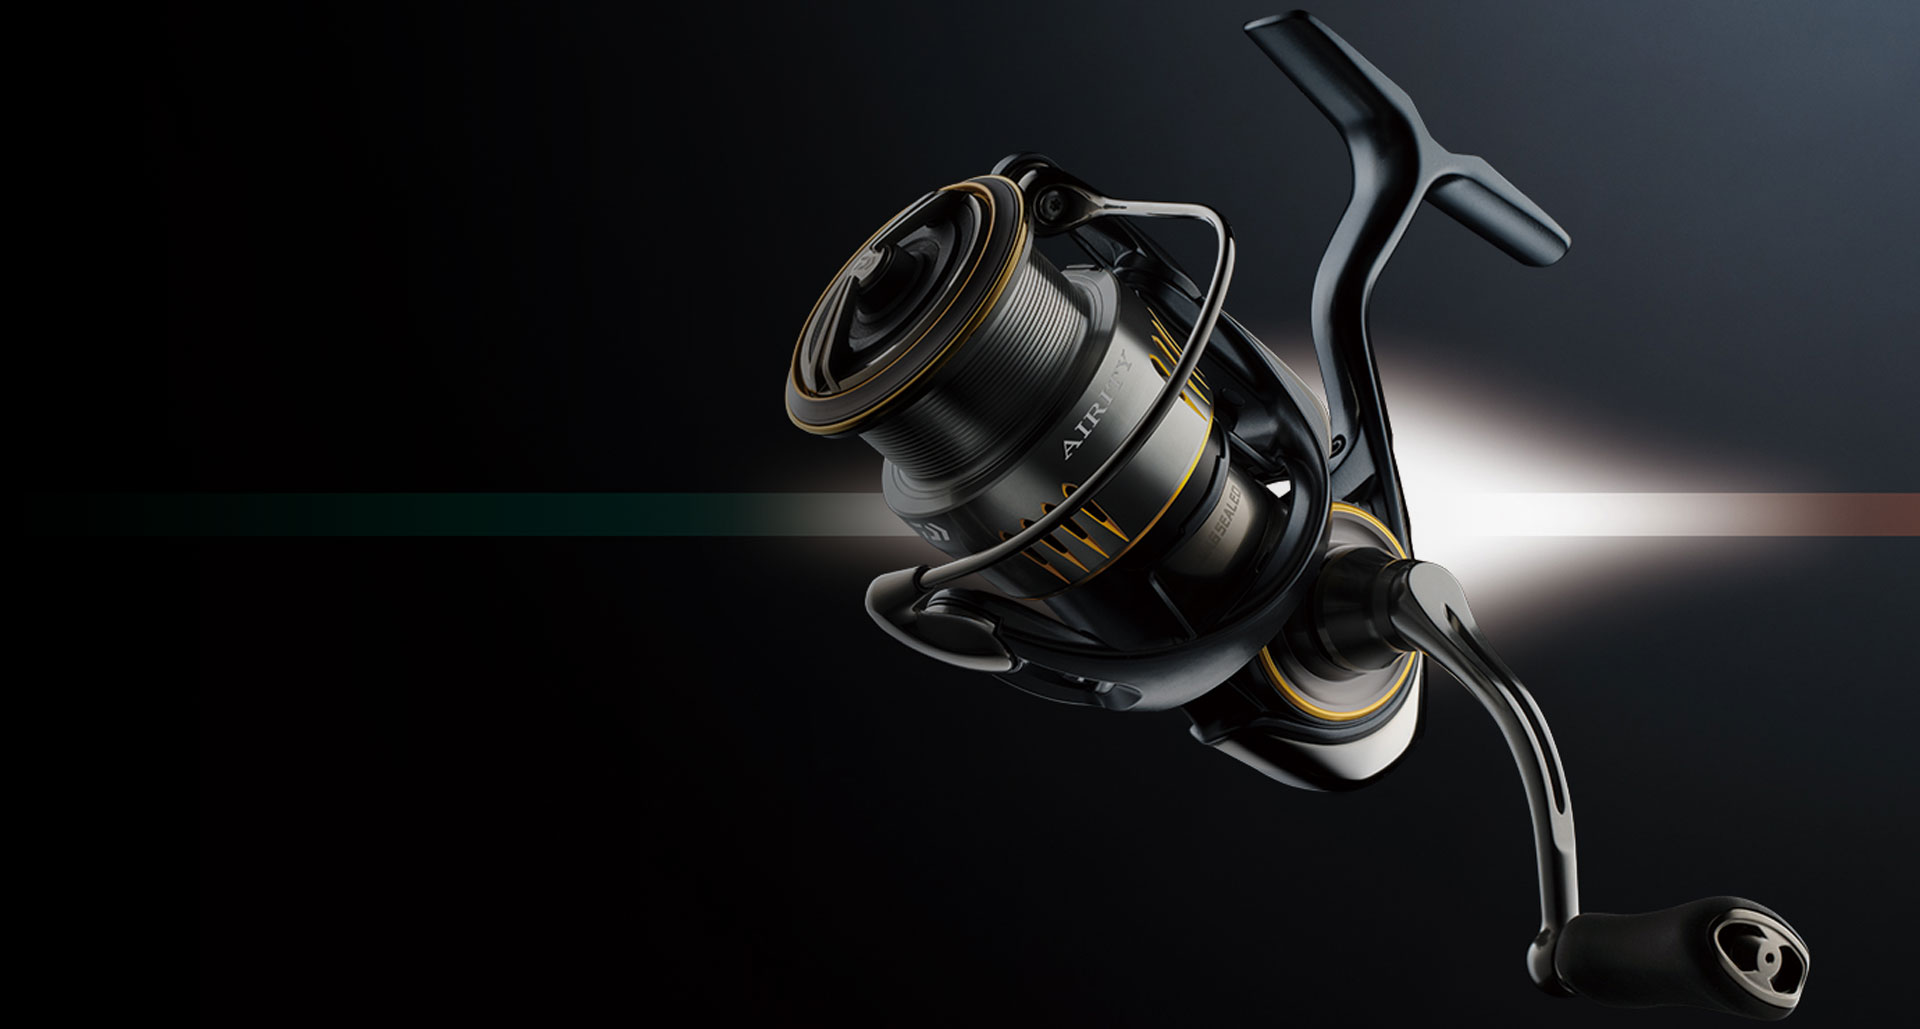 Almost EXIST!? DAIWA 23 AIRITY is out with Full of AIRDRIVE Design!